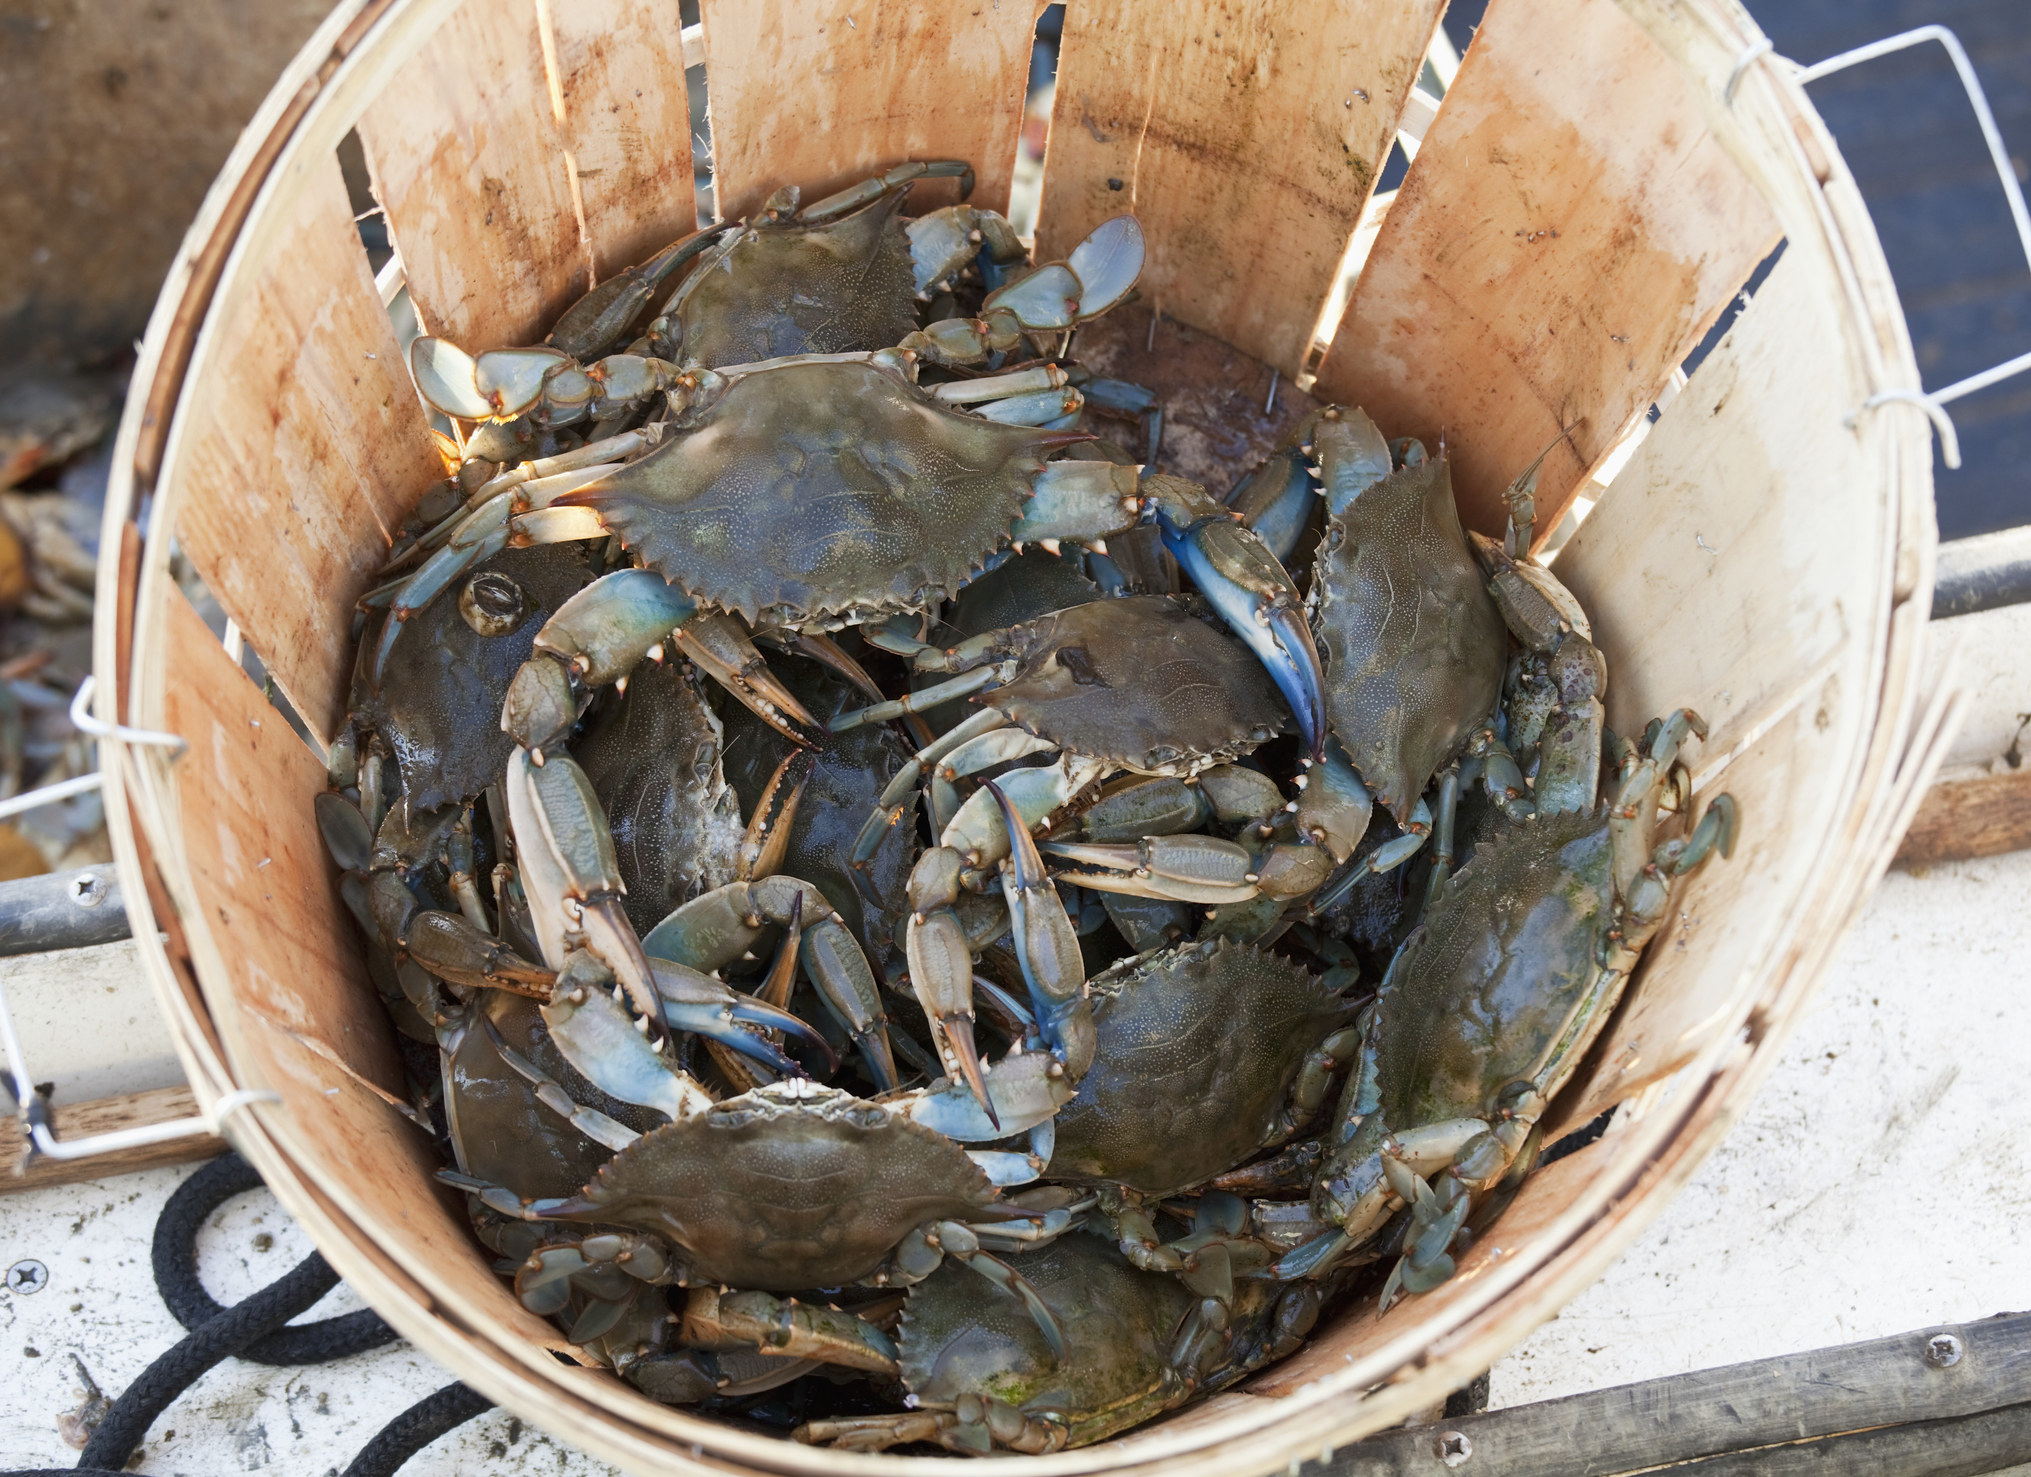 A wooden bucket filled with live crabs